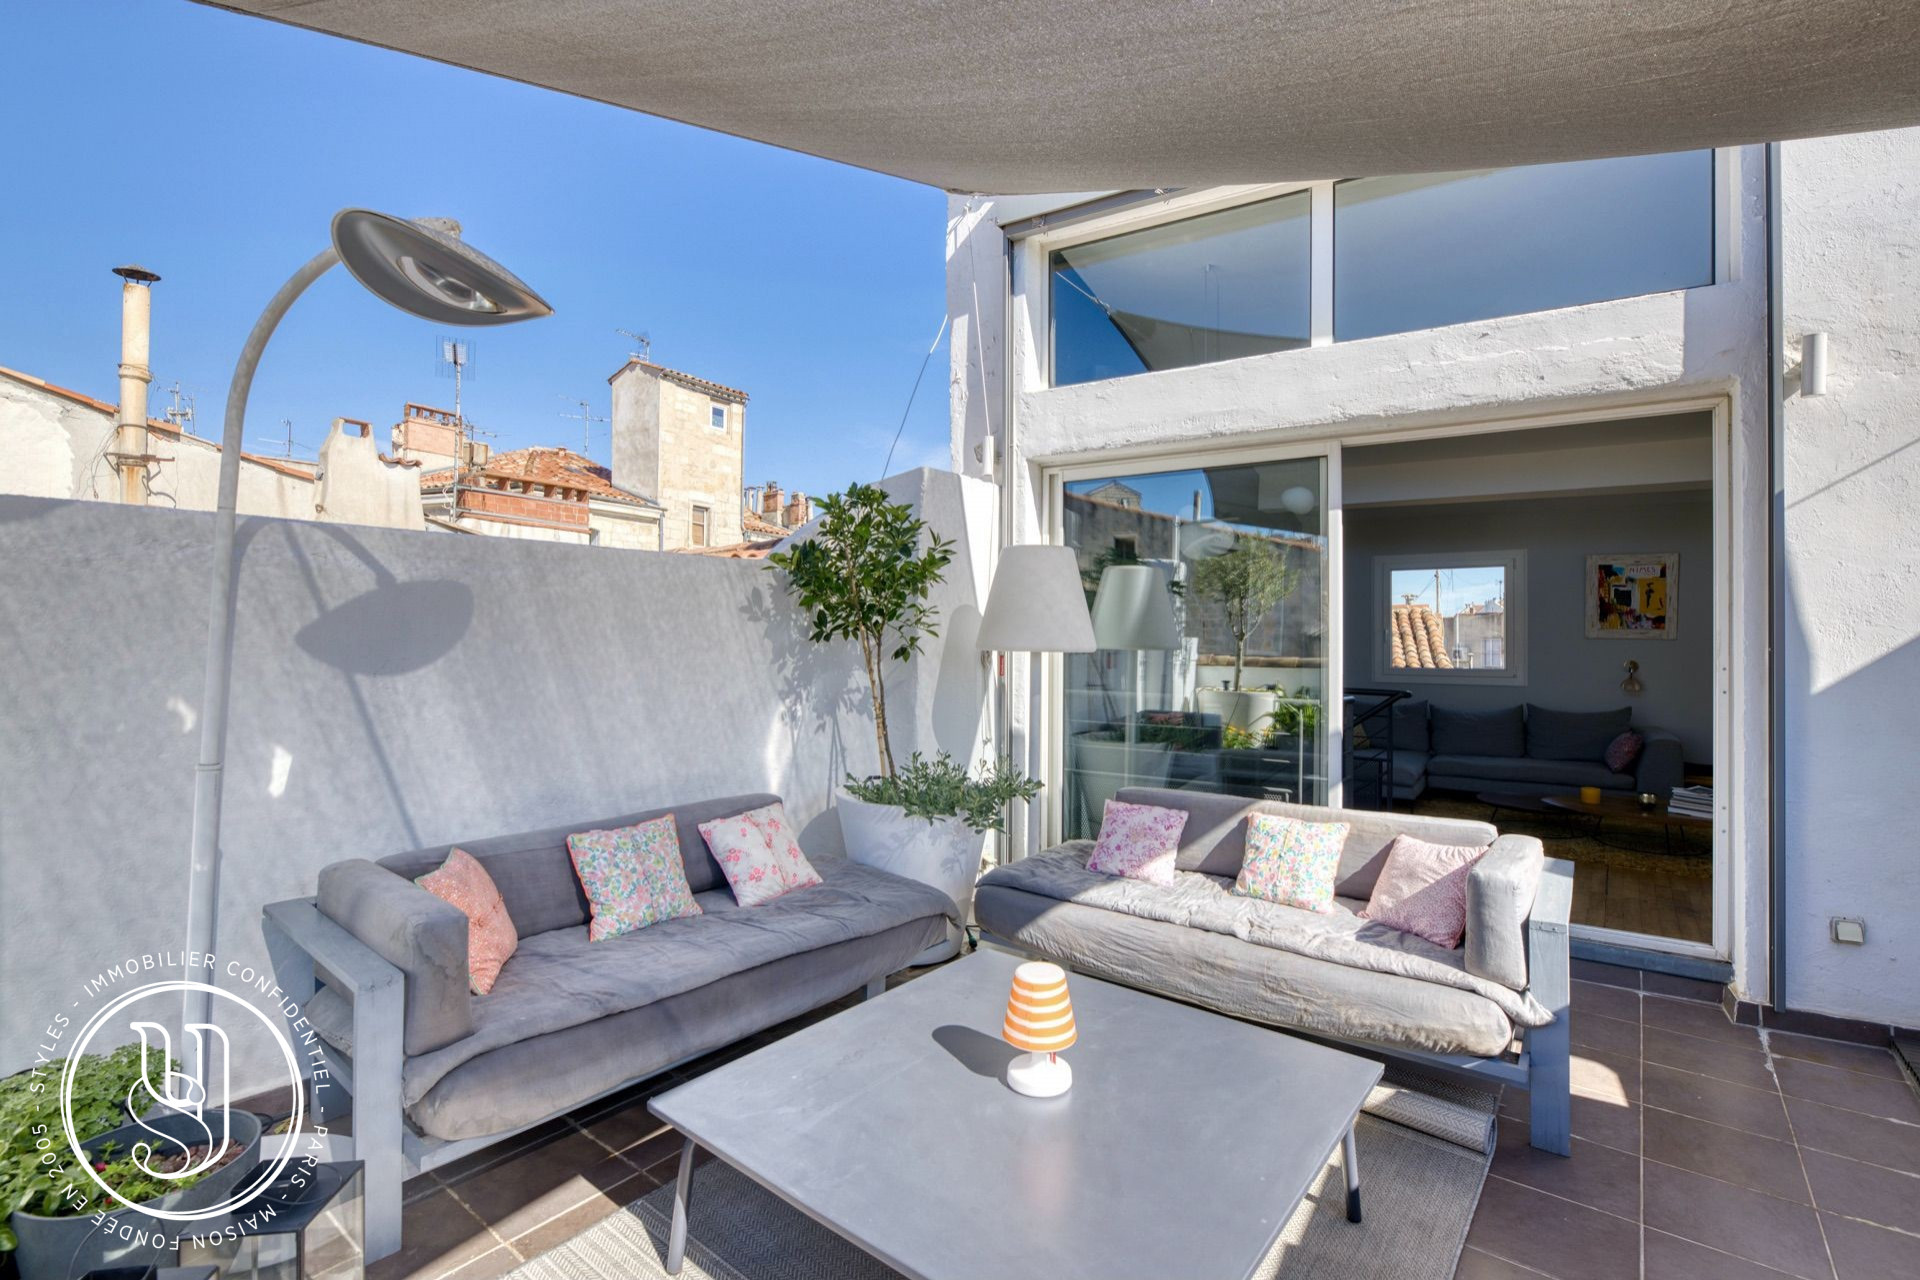 Montpellier - Sold by S T Y L E S, Ecusson, a flat with terraces... - image 8